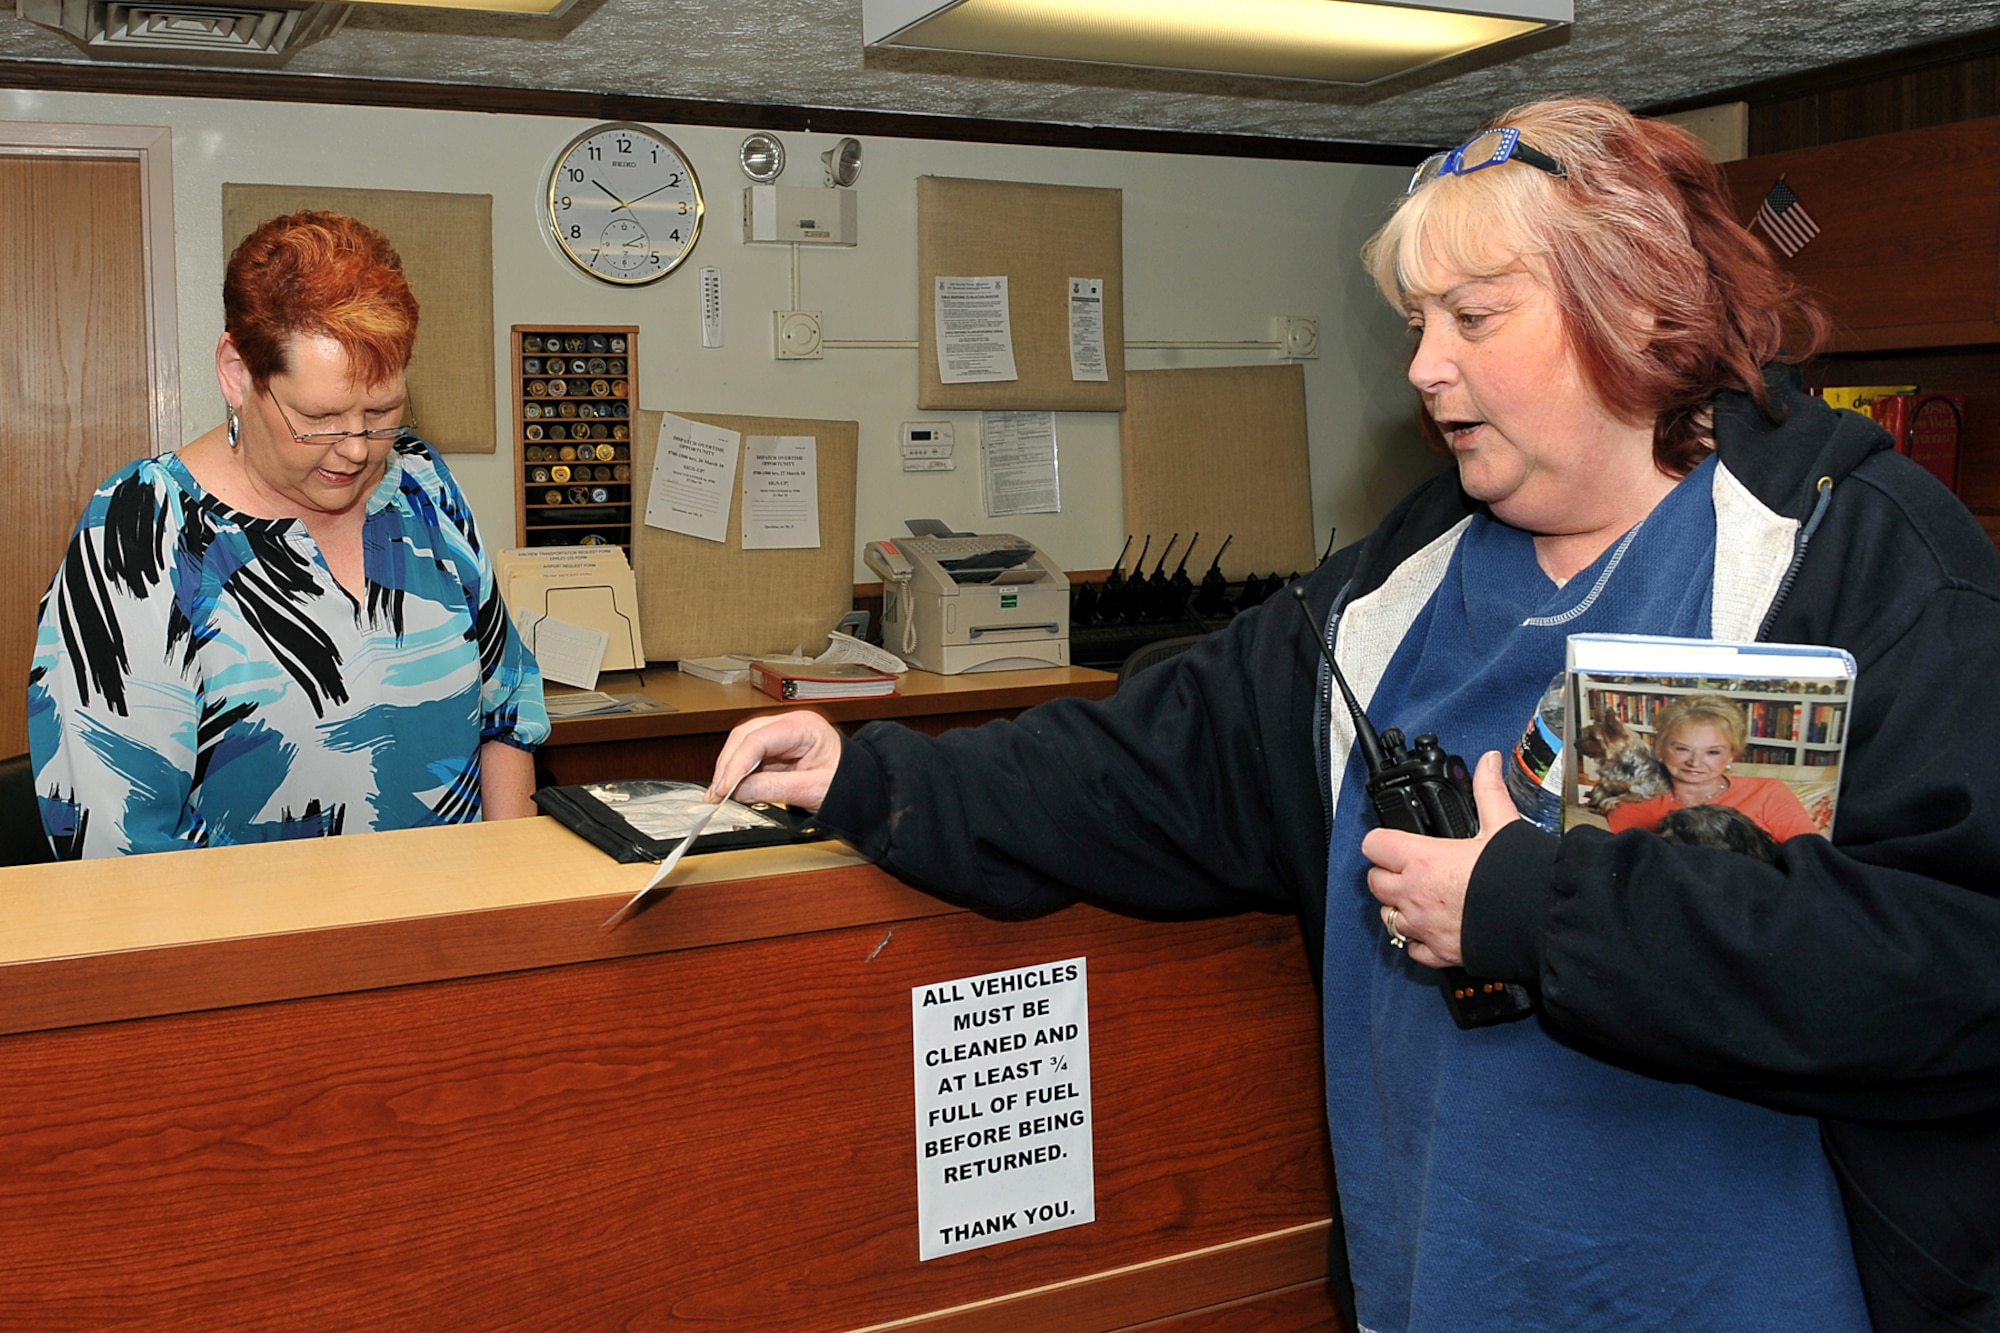 OFFUTT AIR FORCE BASE, Neb. - (From left) Dispatcher Betty McCubbin gives keys to base shuttle driver Sheila Wilen-Paulus before shift change inside the vehicle operations office March 19. Both Ms. McCubbin and Ms. Wilen-Paulus are part of the 55th Mission Support Group's Logistics Support Division. The division's vehicle operations section takes care of Offutt's transportation needs using a fleet of more than 60 vehicles.  

U.S. Air Force photo by Charles Haymond